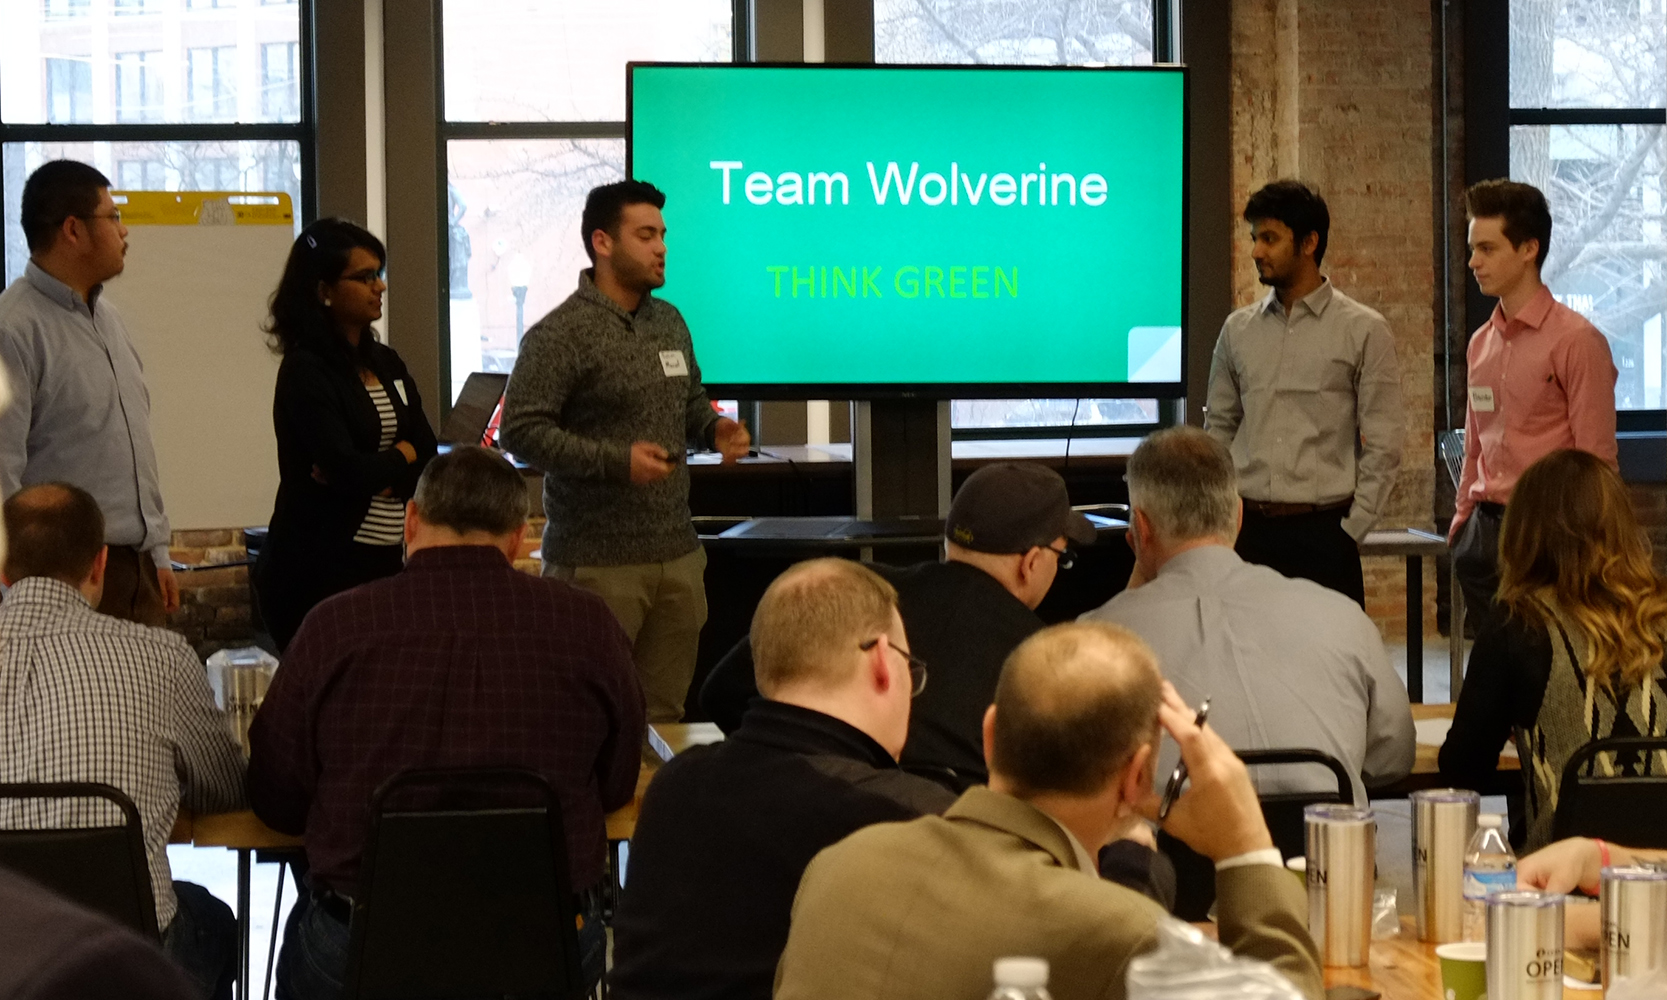 Presentation of 5 people in front of a screen that reads: Team Wolverine Think Green.